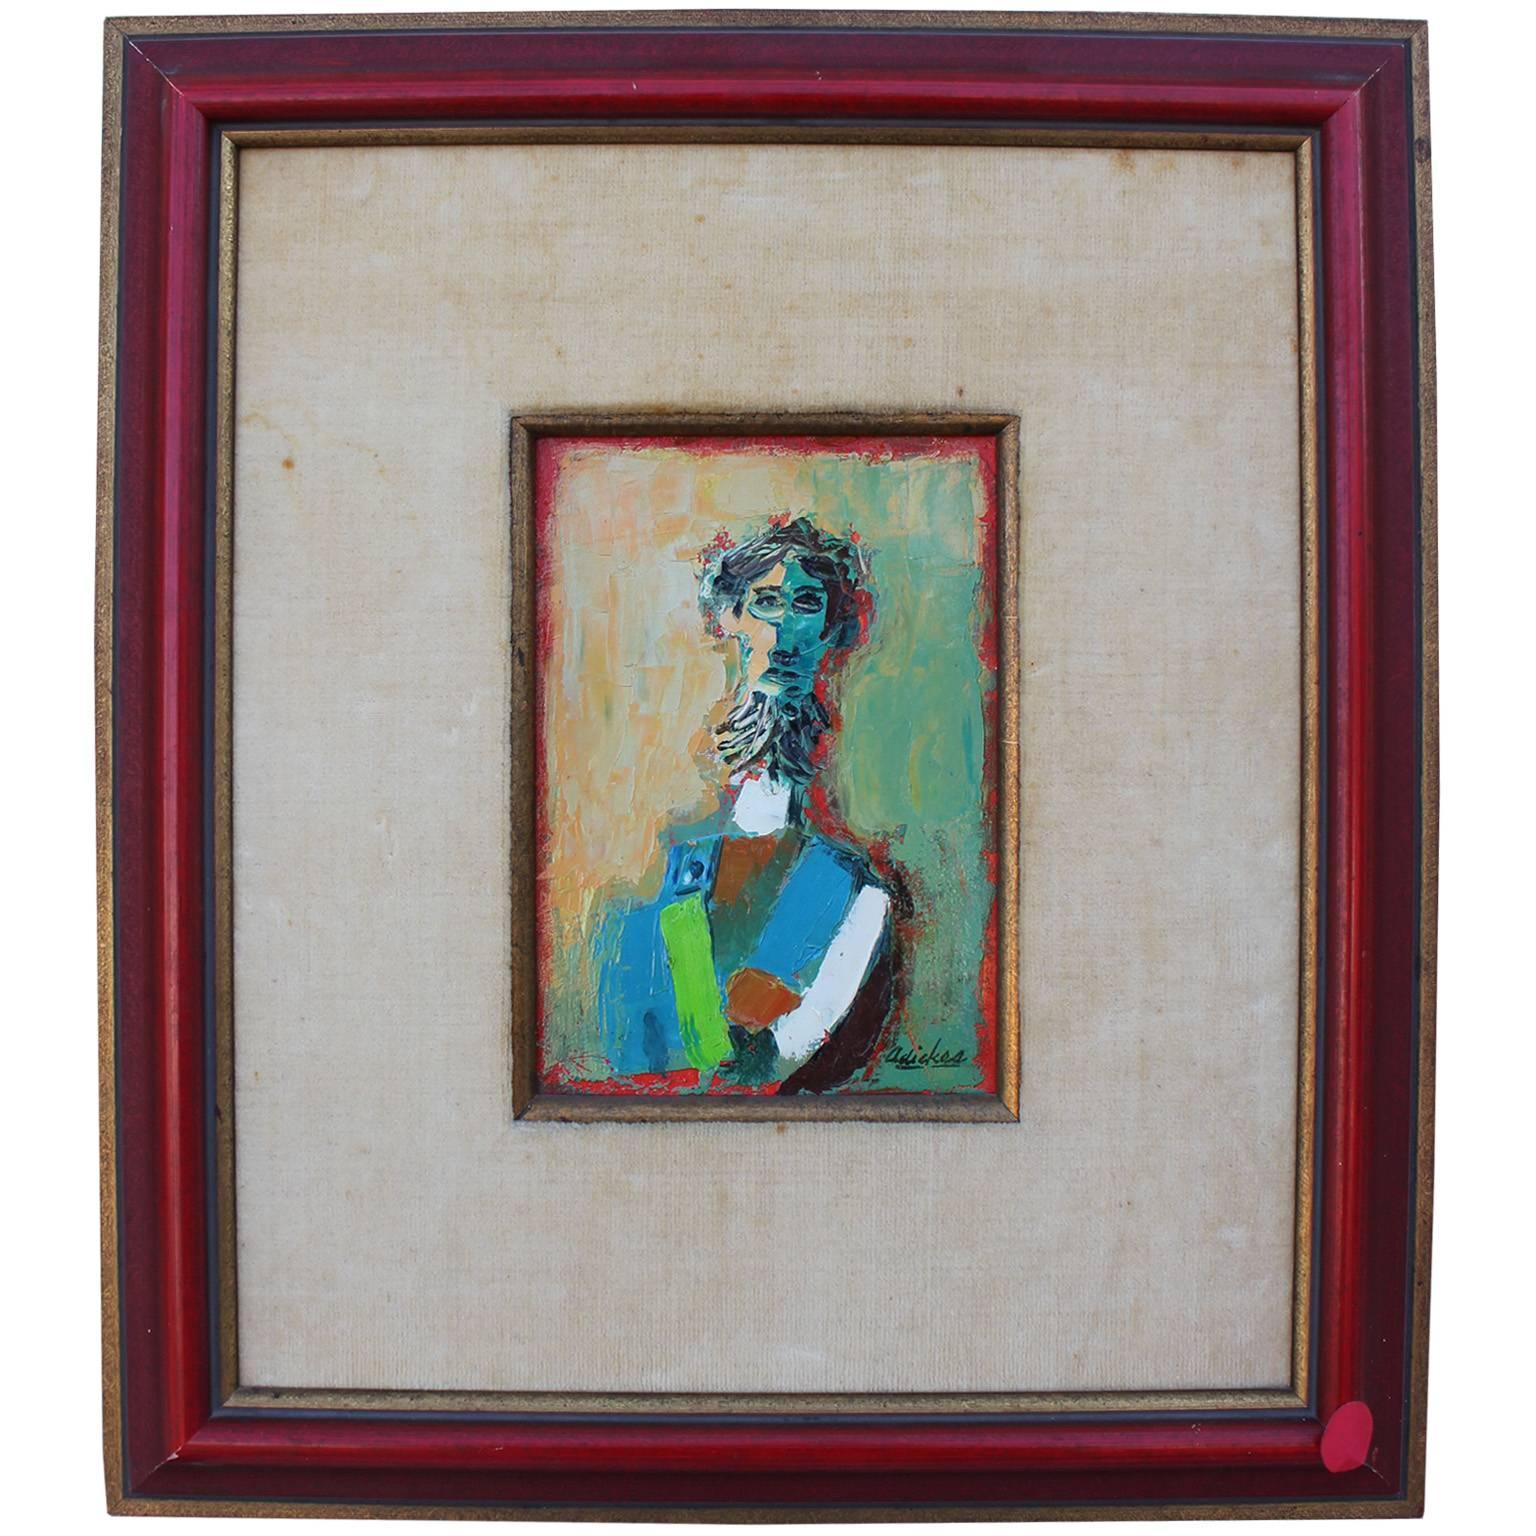 Beautiful abstract portrait by David Adickes. Vibrant color and wonderful composition. An red frame finishes the piece. Comes from a private estate with provenance from a local gallery.

David Adickes, born 1927 in Huntsville, Texas, is an